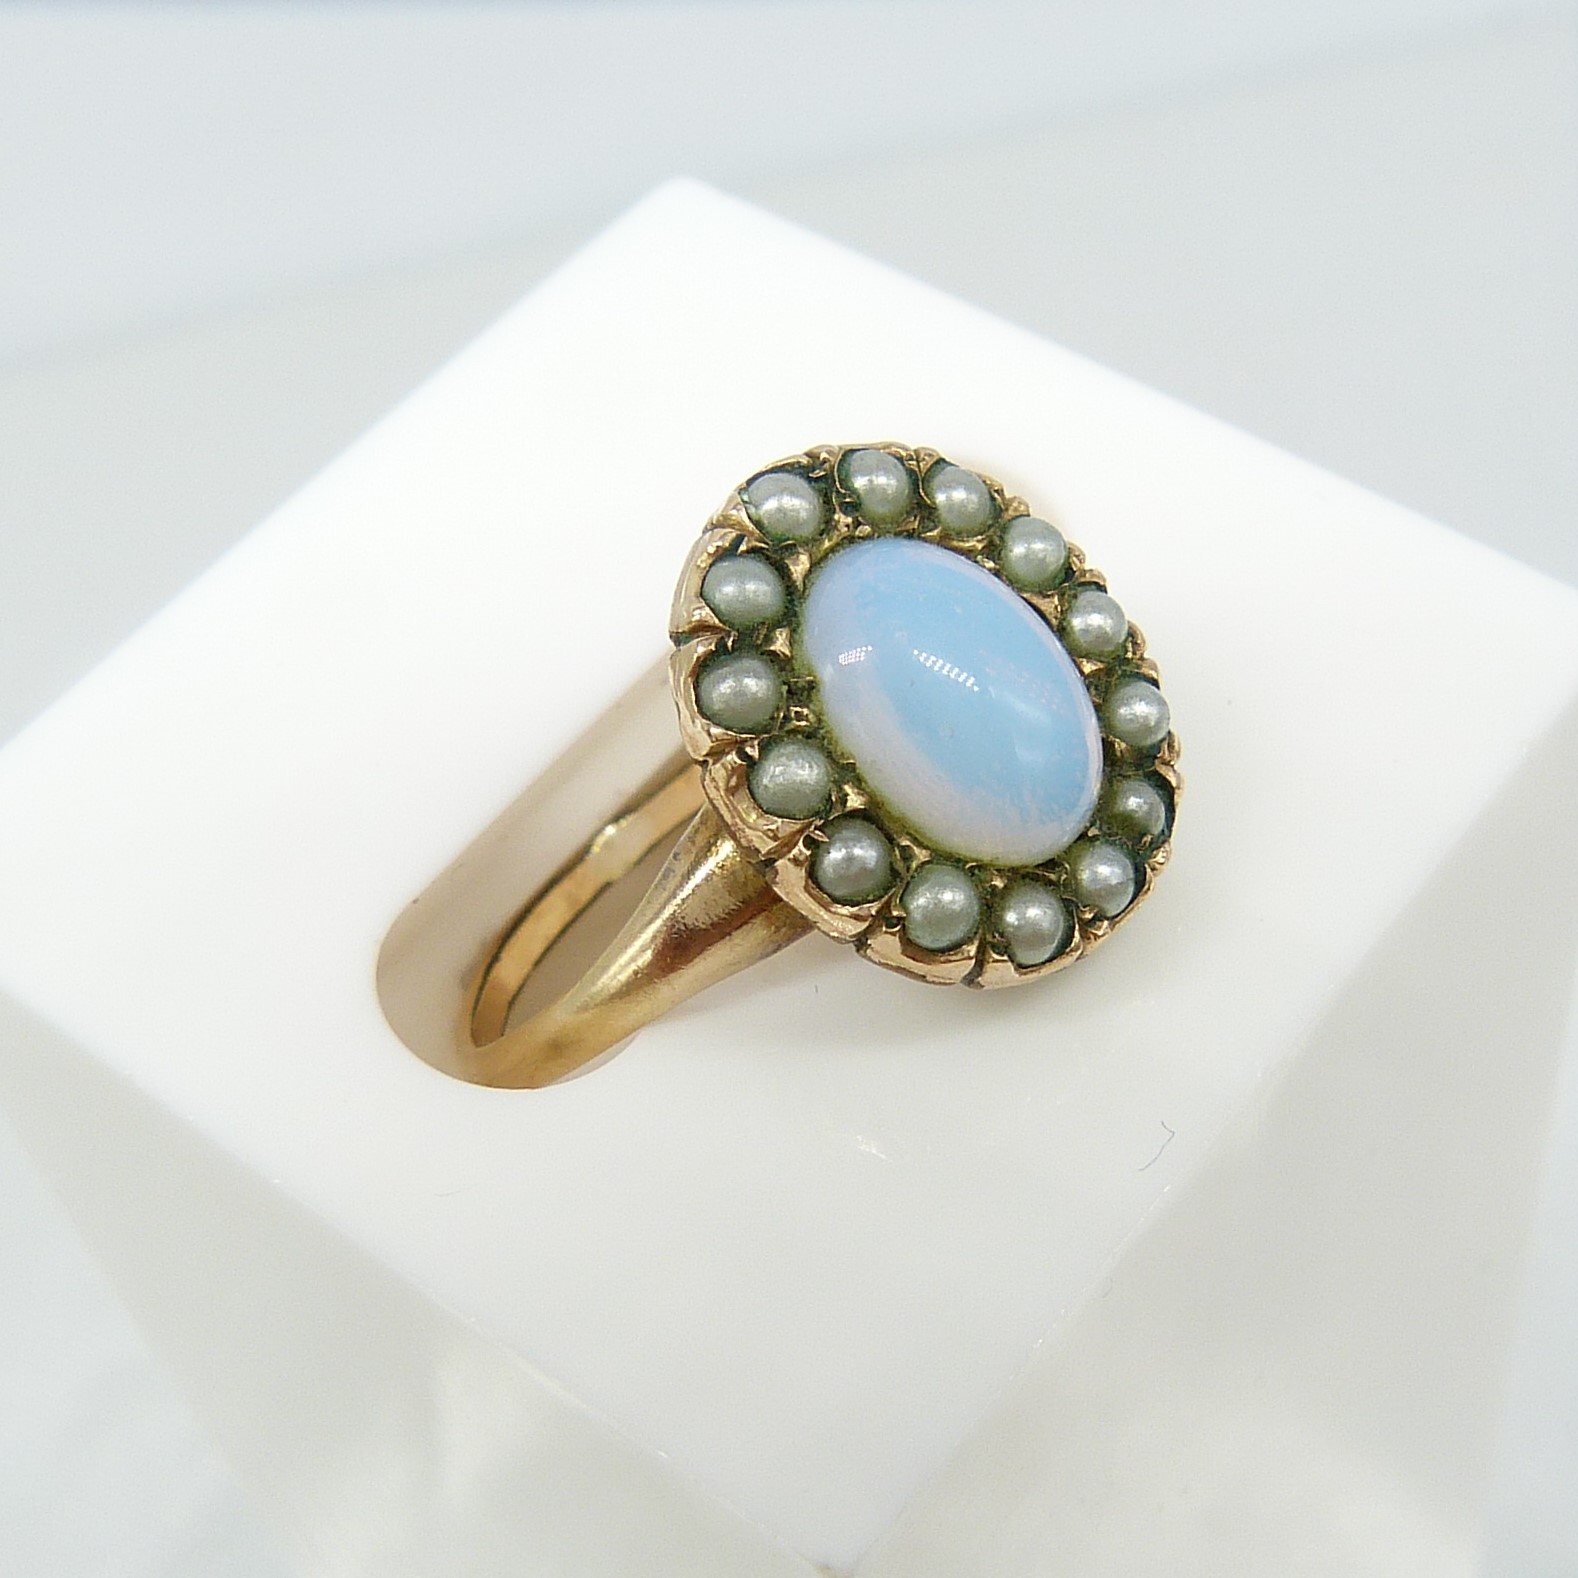 Vintage Victorian-Style Halo Ring Set With Opalite and Seed Pearls - Image 5 of 6